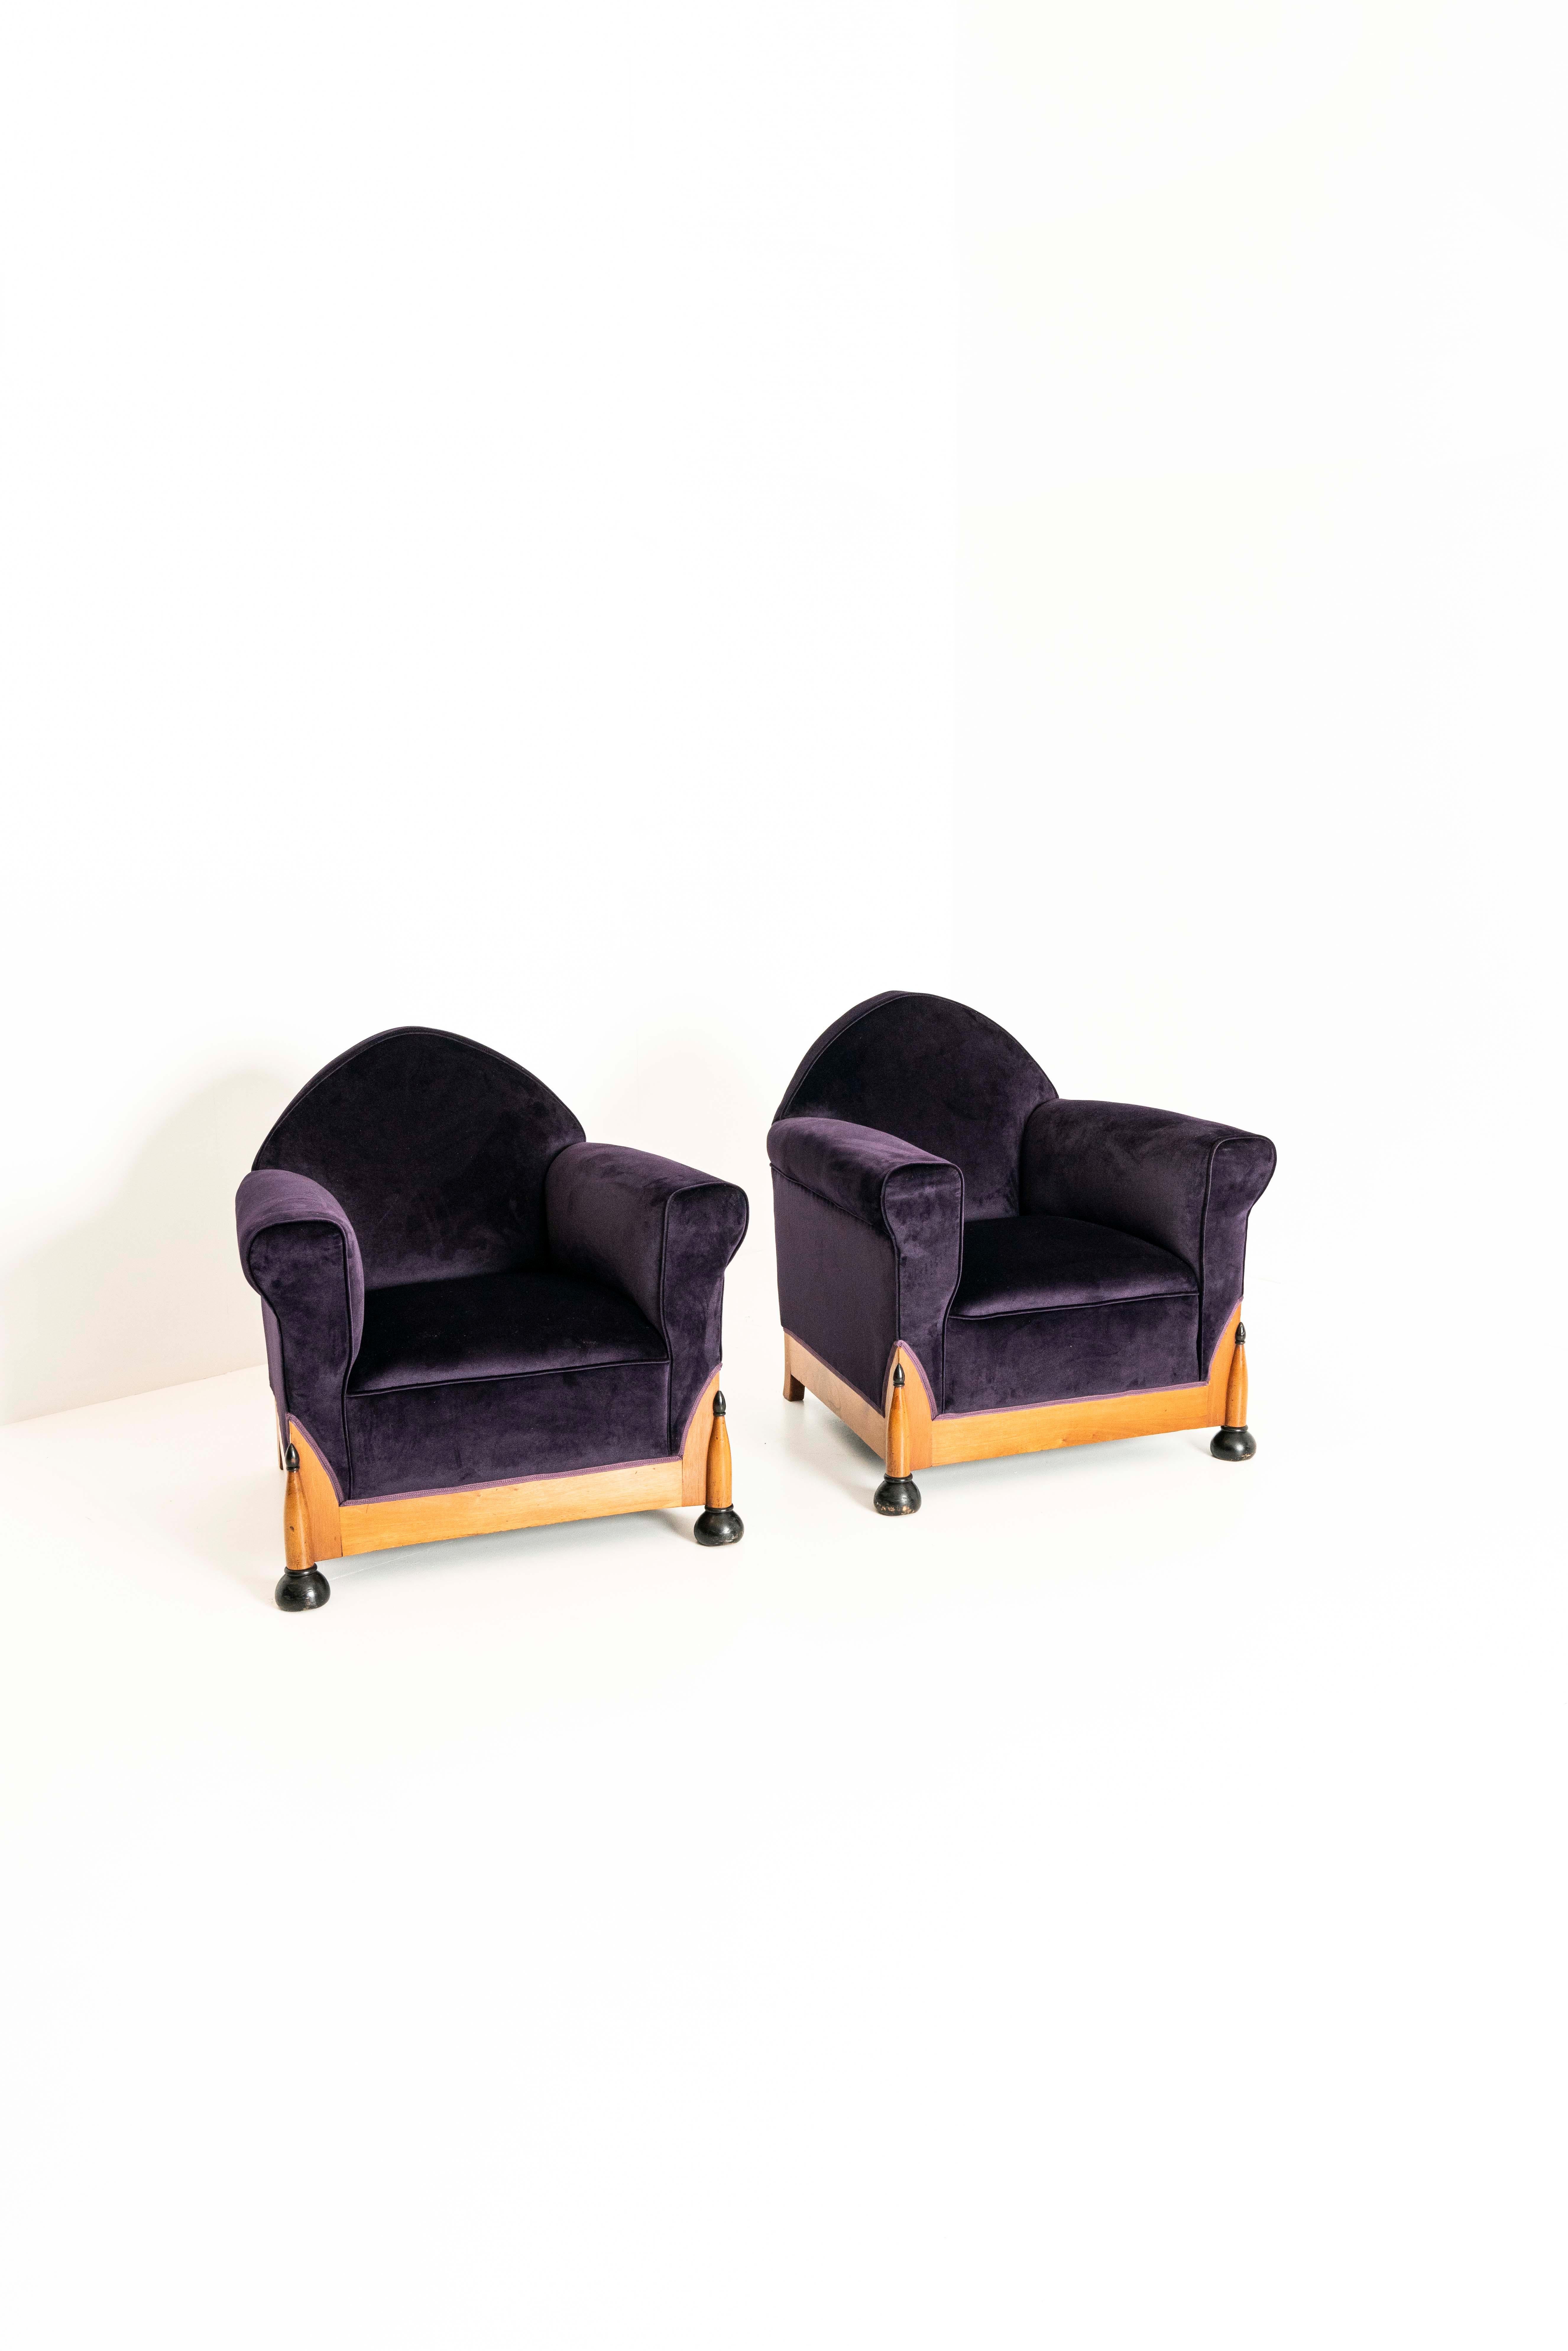 Art Deco Two Amsterdam School Lounge Chairs in Purple Velvet, The Netherlands 1930s